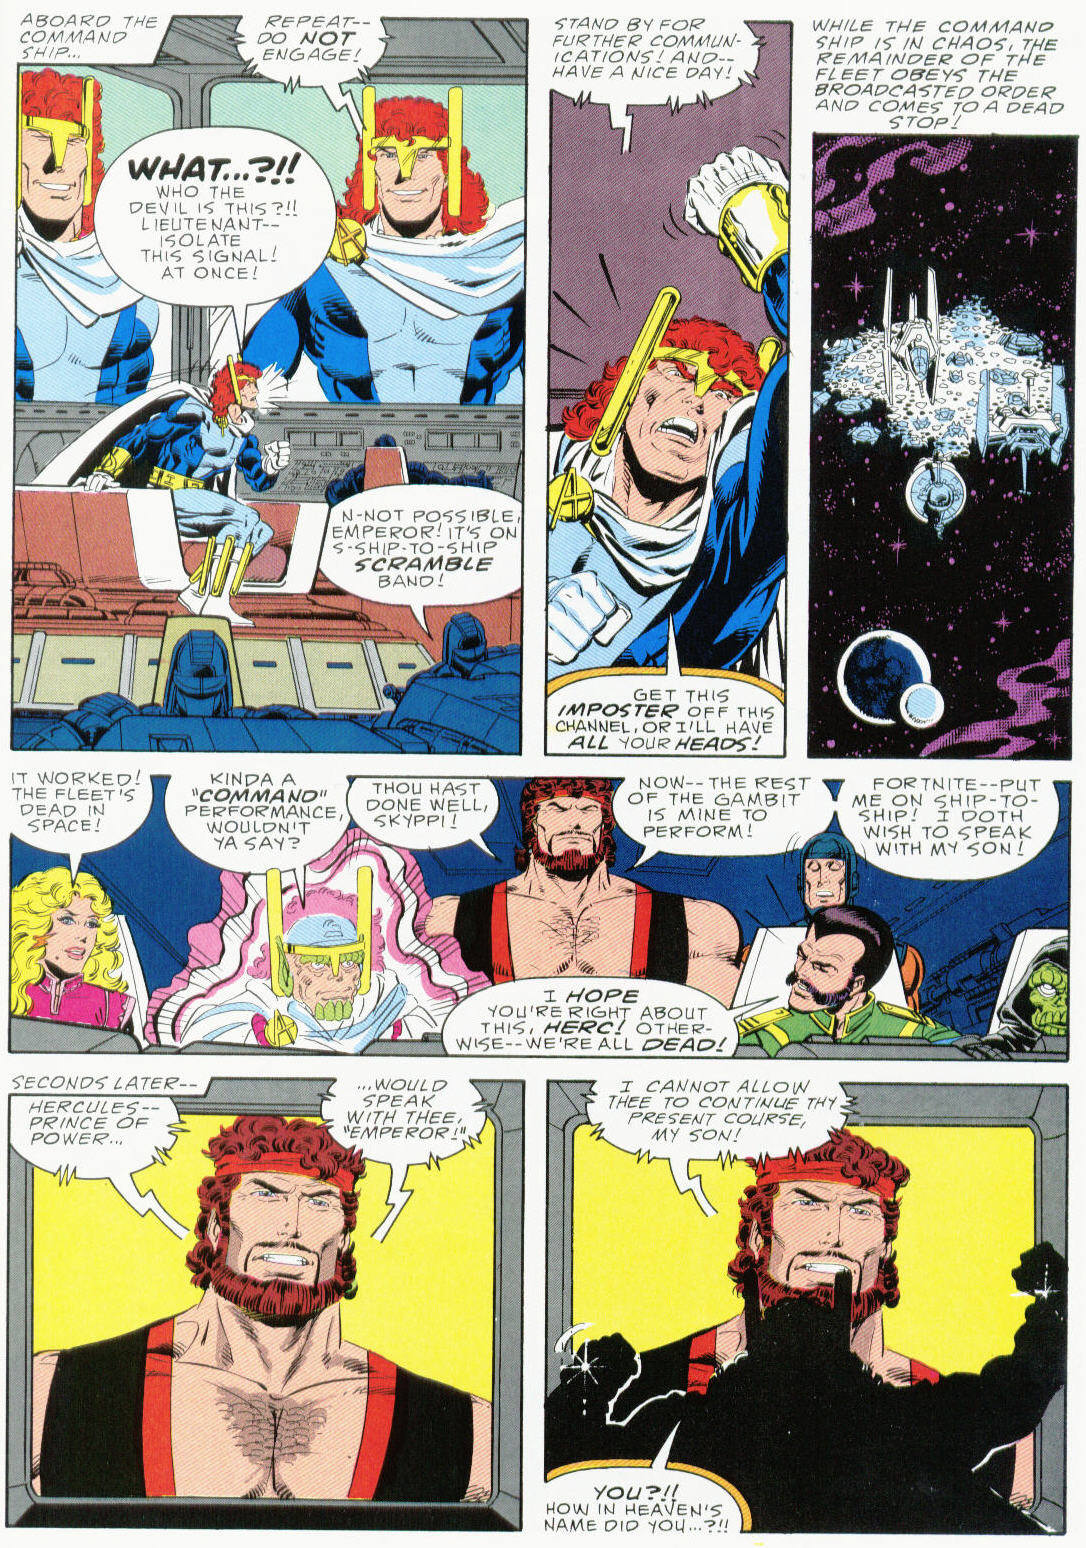 Marvel Graphic Novel issue 37 - Hercules Prince of Power - Full Circle - Page 61